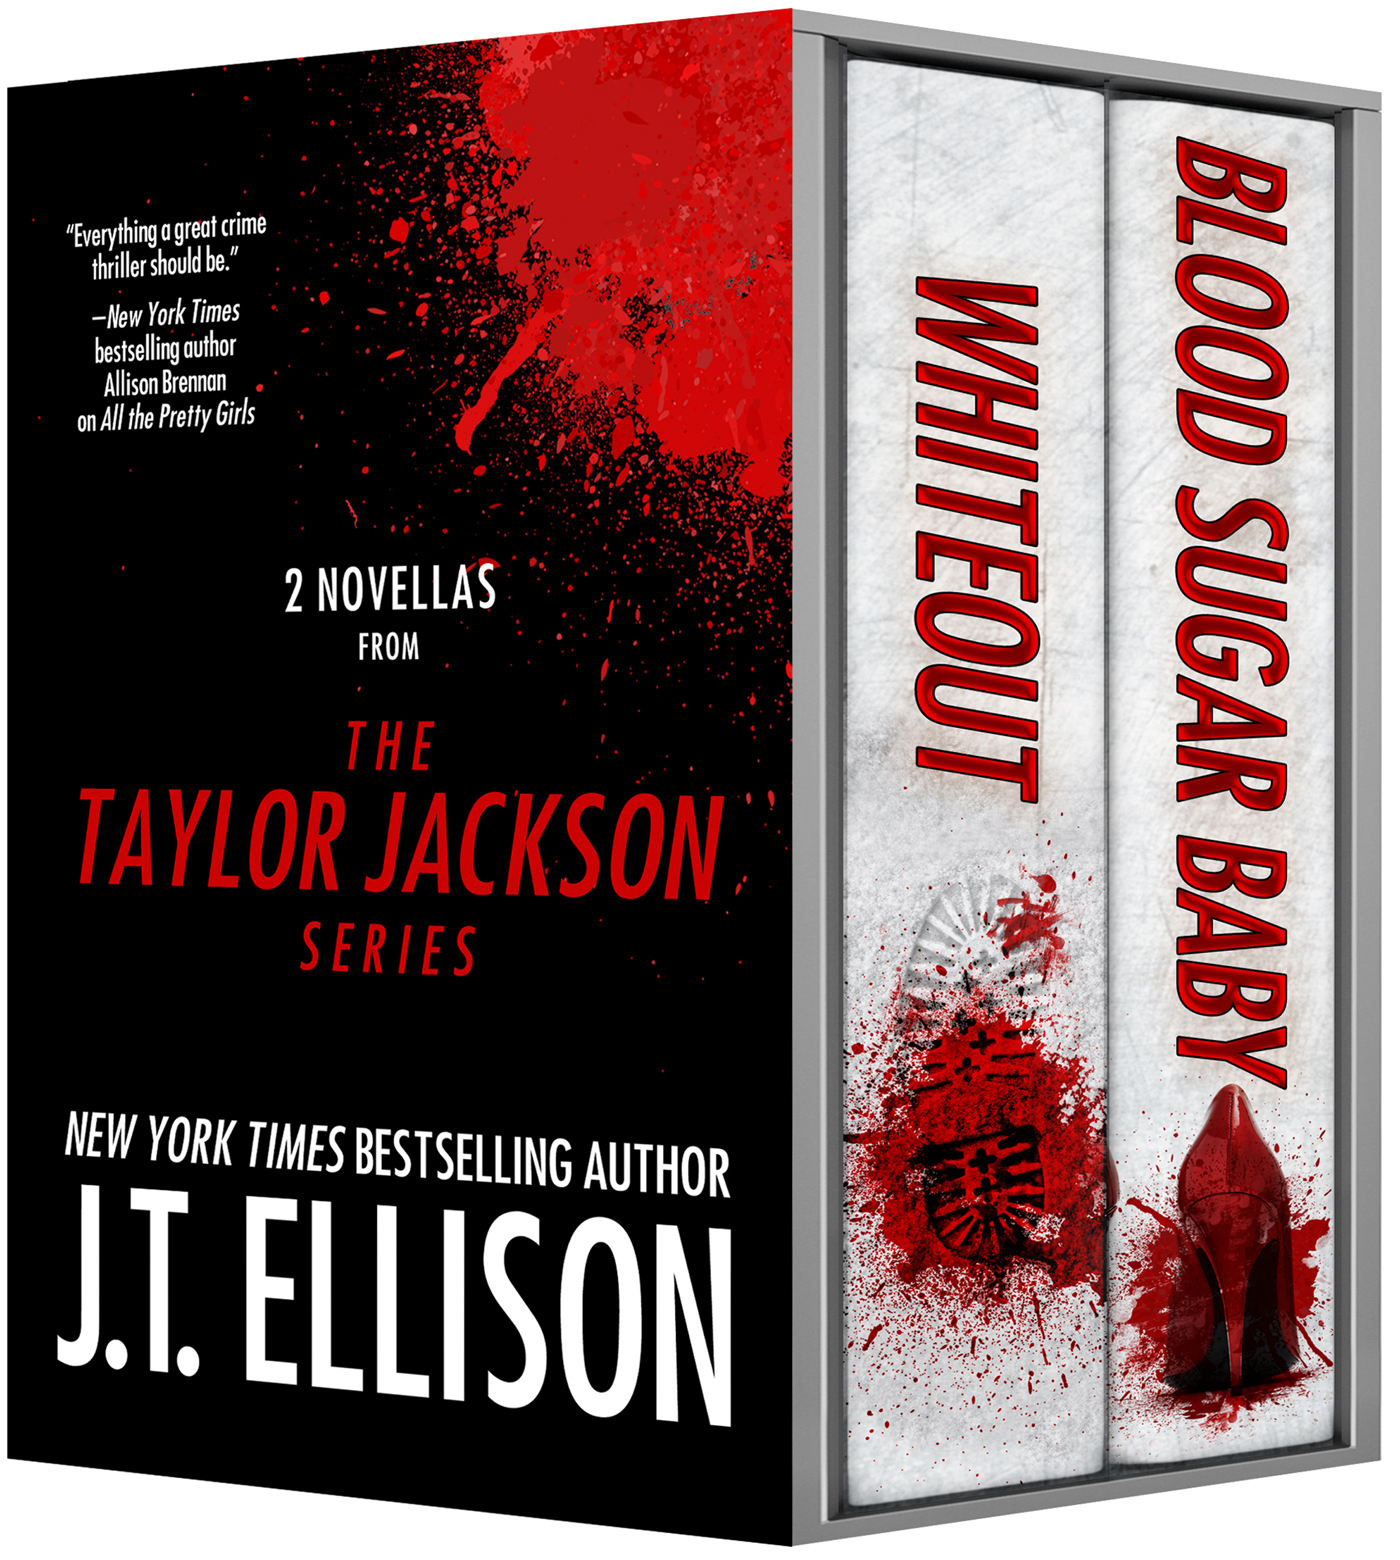 2 Novellas from the Taylor Jackson series